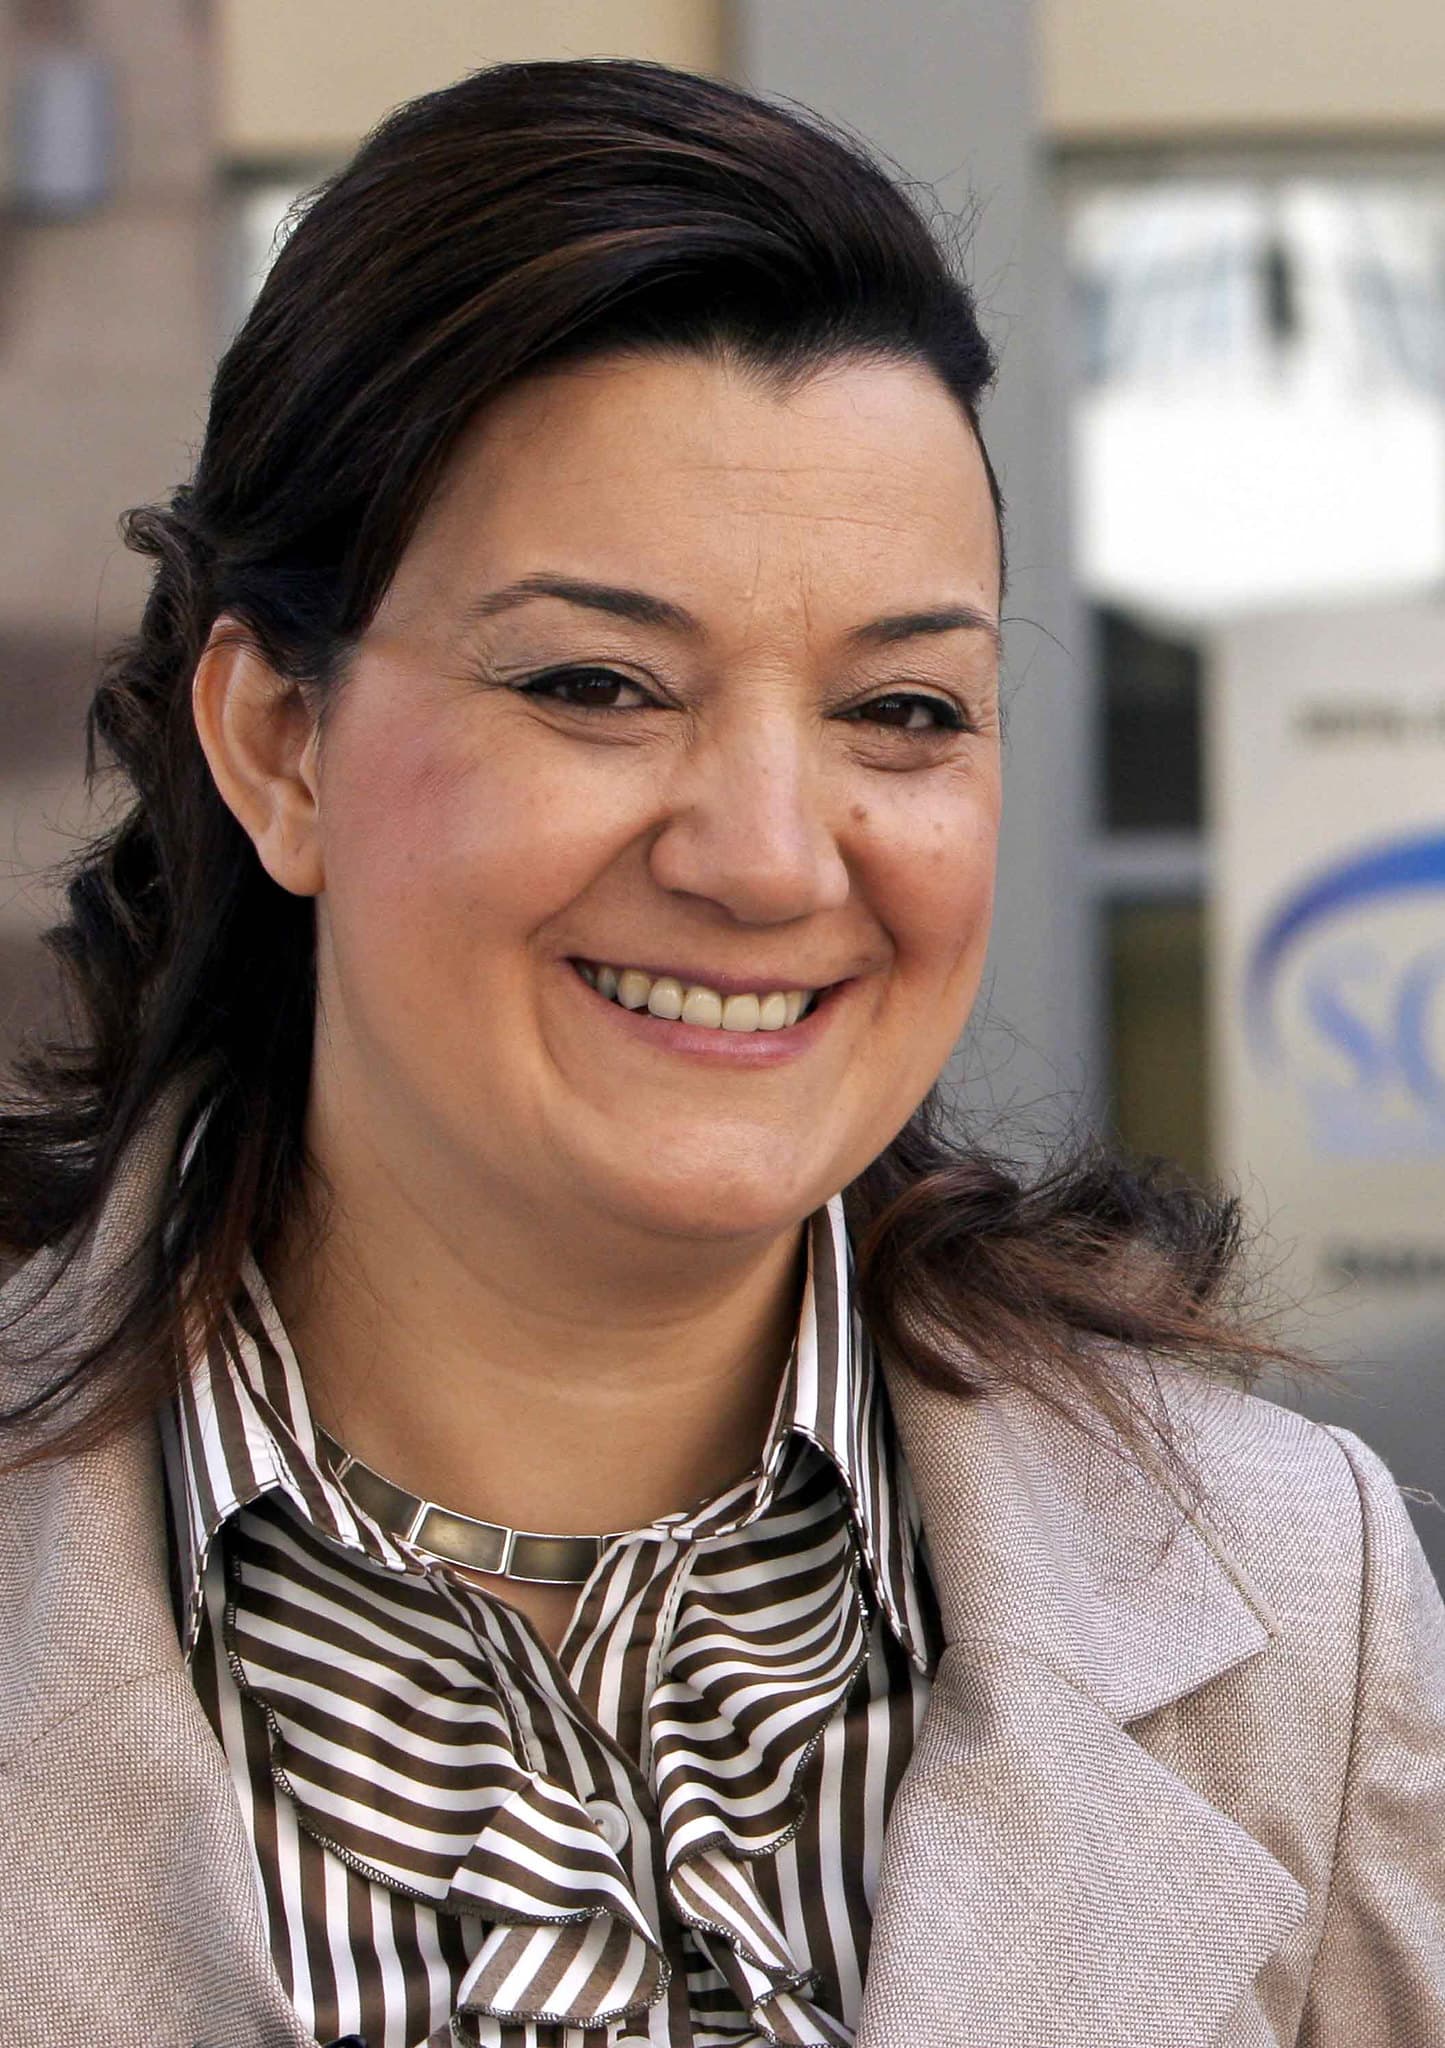 A smiling woman wearing a suit.